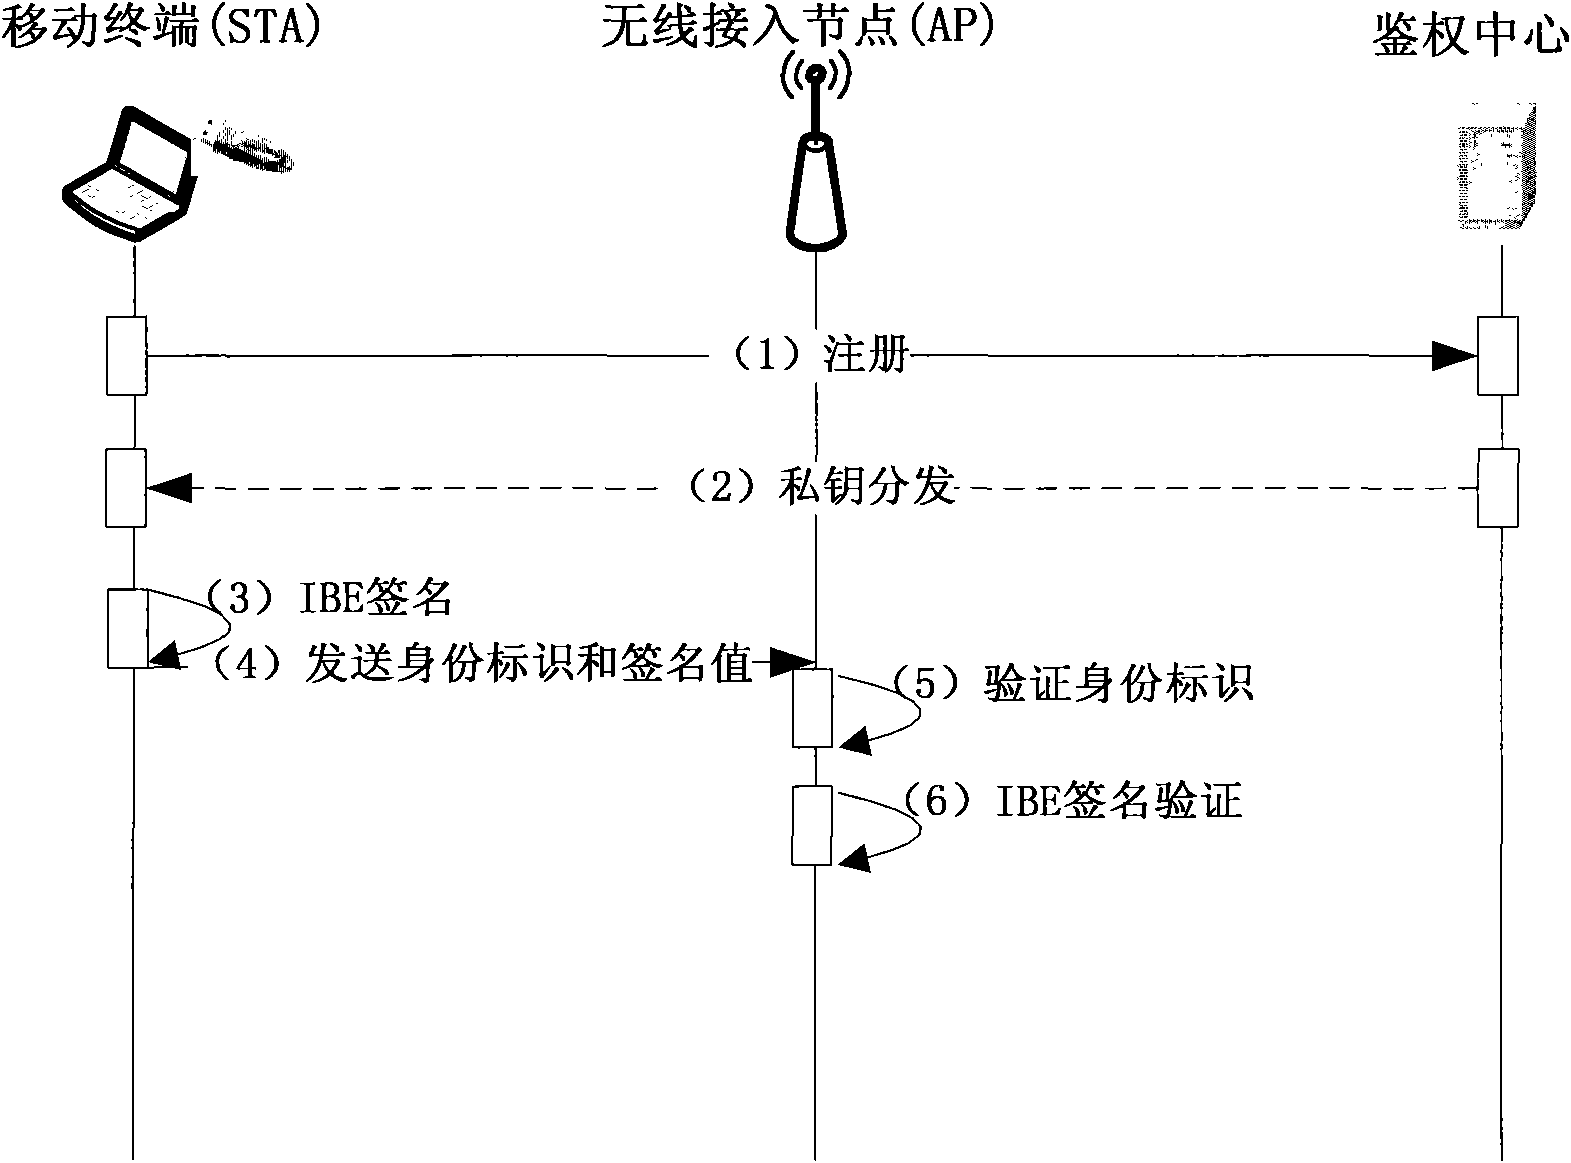 Access control method and system for wireless local area network